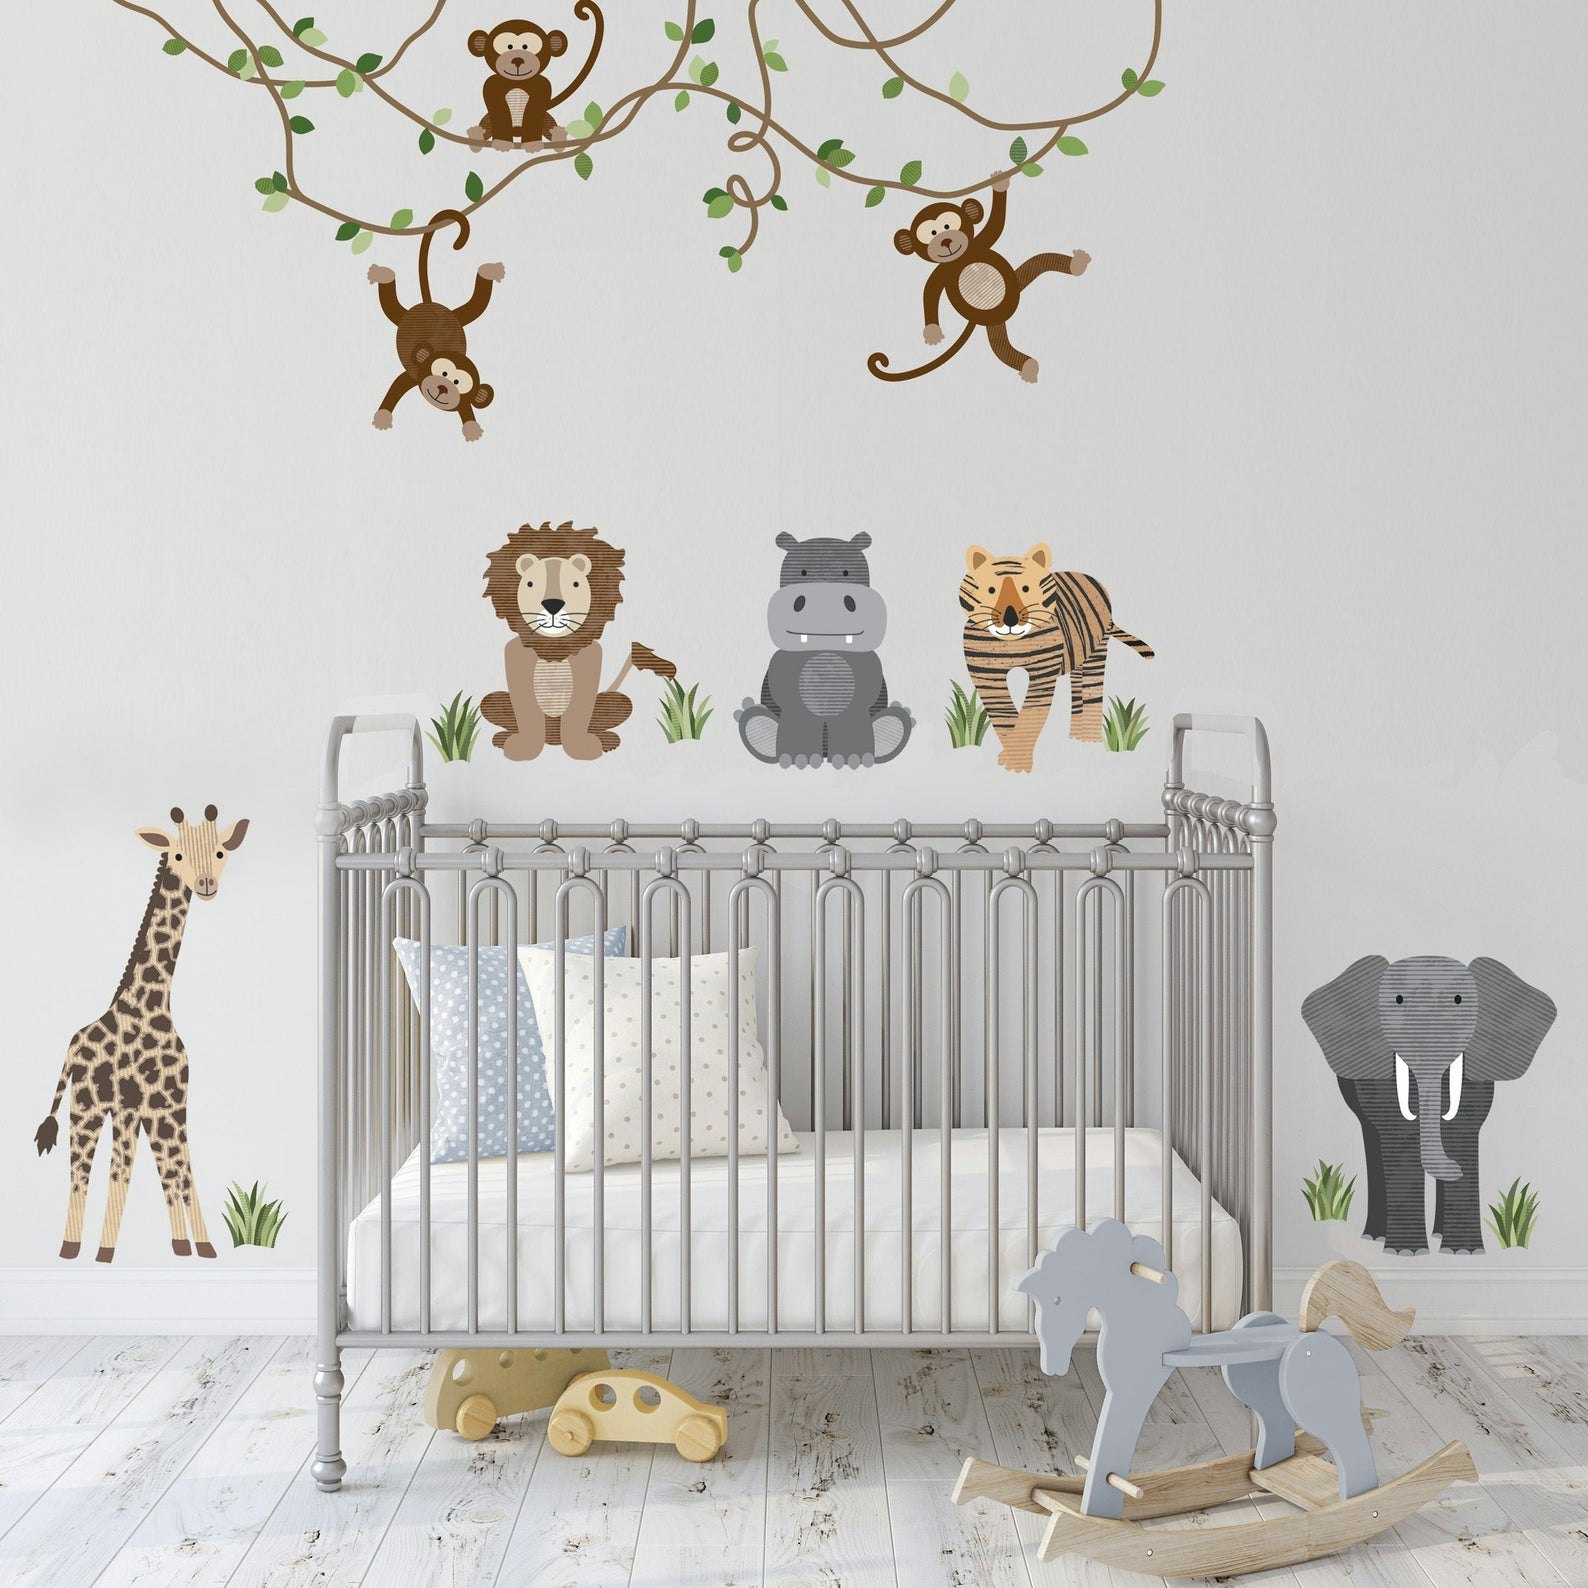 Details about   Home Wall Decal Mural Art Switch Vinyl Decor Baby Removable Sticker Room Nursery 